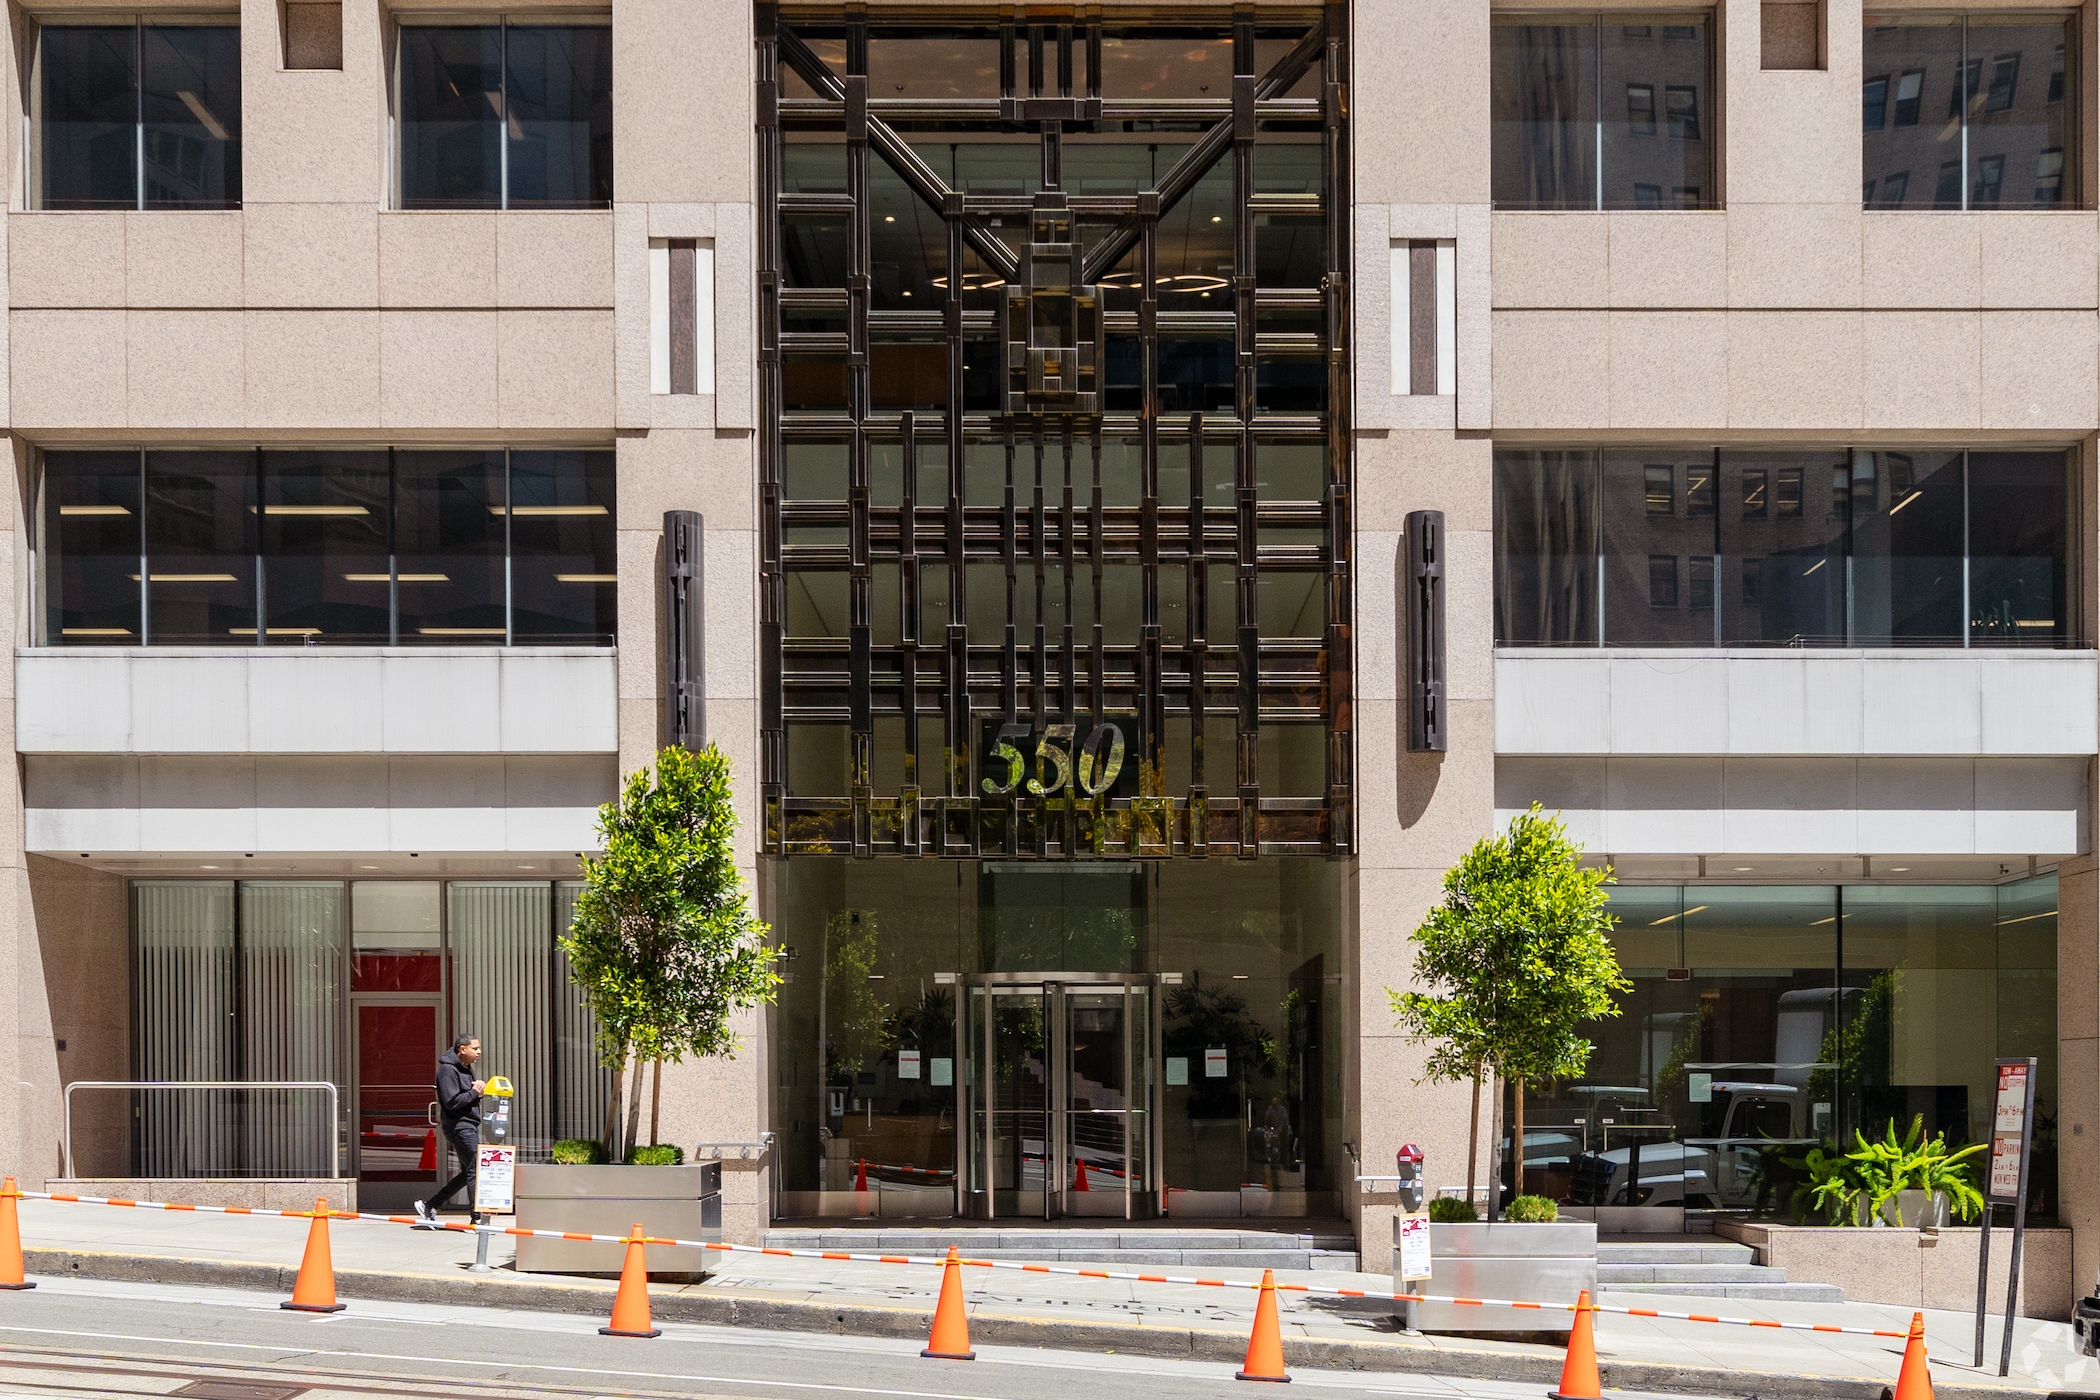 Wells Fargo acquired the San Francisco office tower at 550 California St. for about $110 million in 2005. (CoStar)